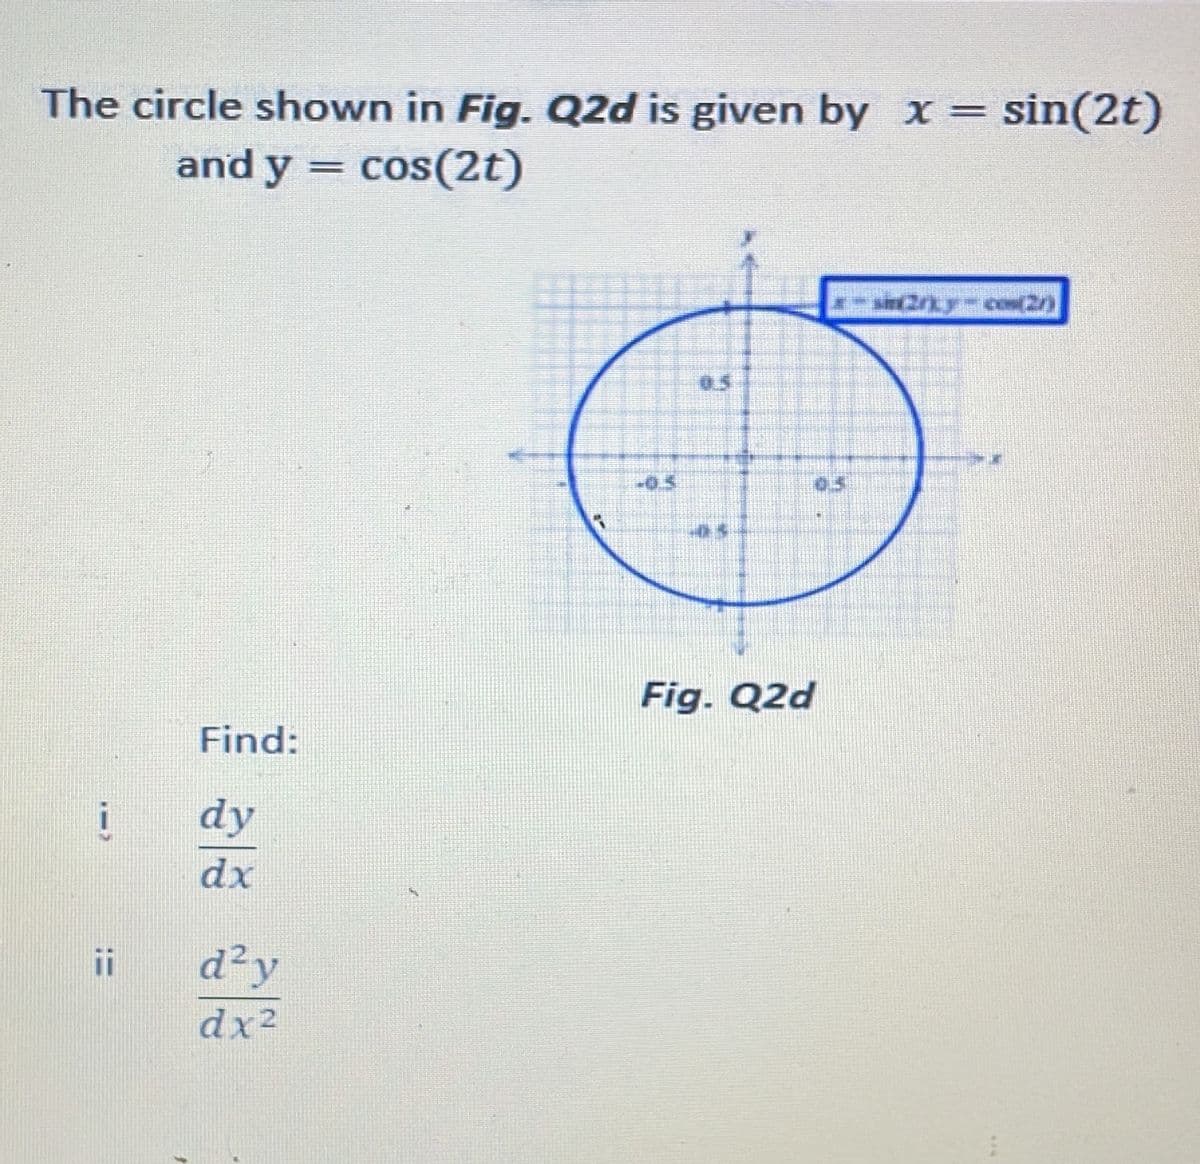 The circle shown in Fig. Q2d is given by x= sin(2t)
and y = cos(2t)
%3D
- sin2ry- co20
0.5
-0.5
0.5
Fig. Q2d
Find:
dy
dx
ii
d²y
dx²
